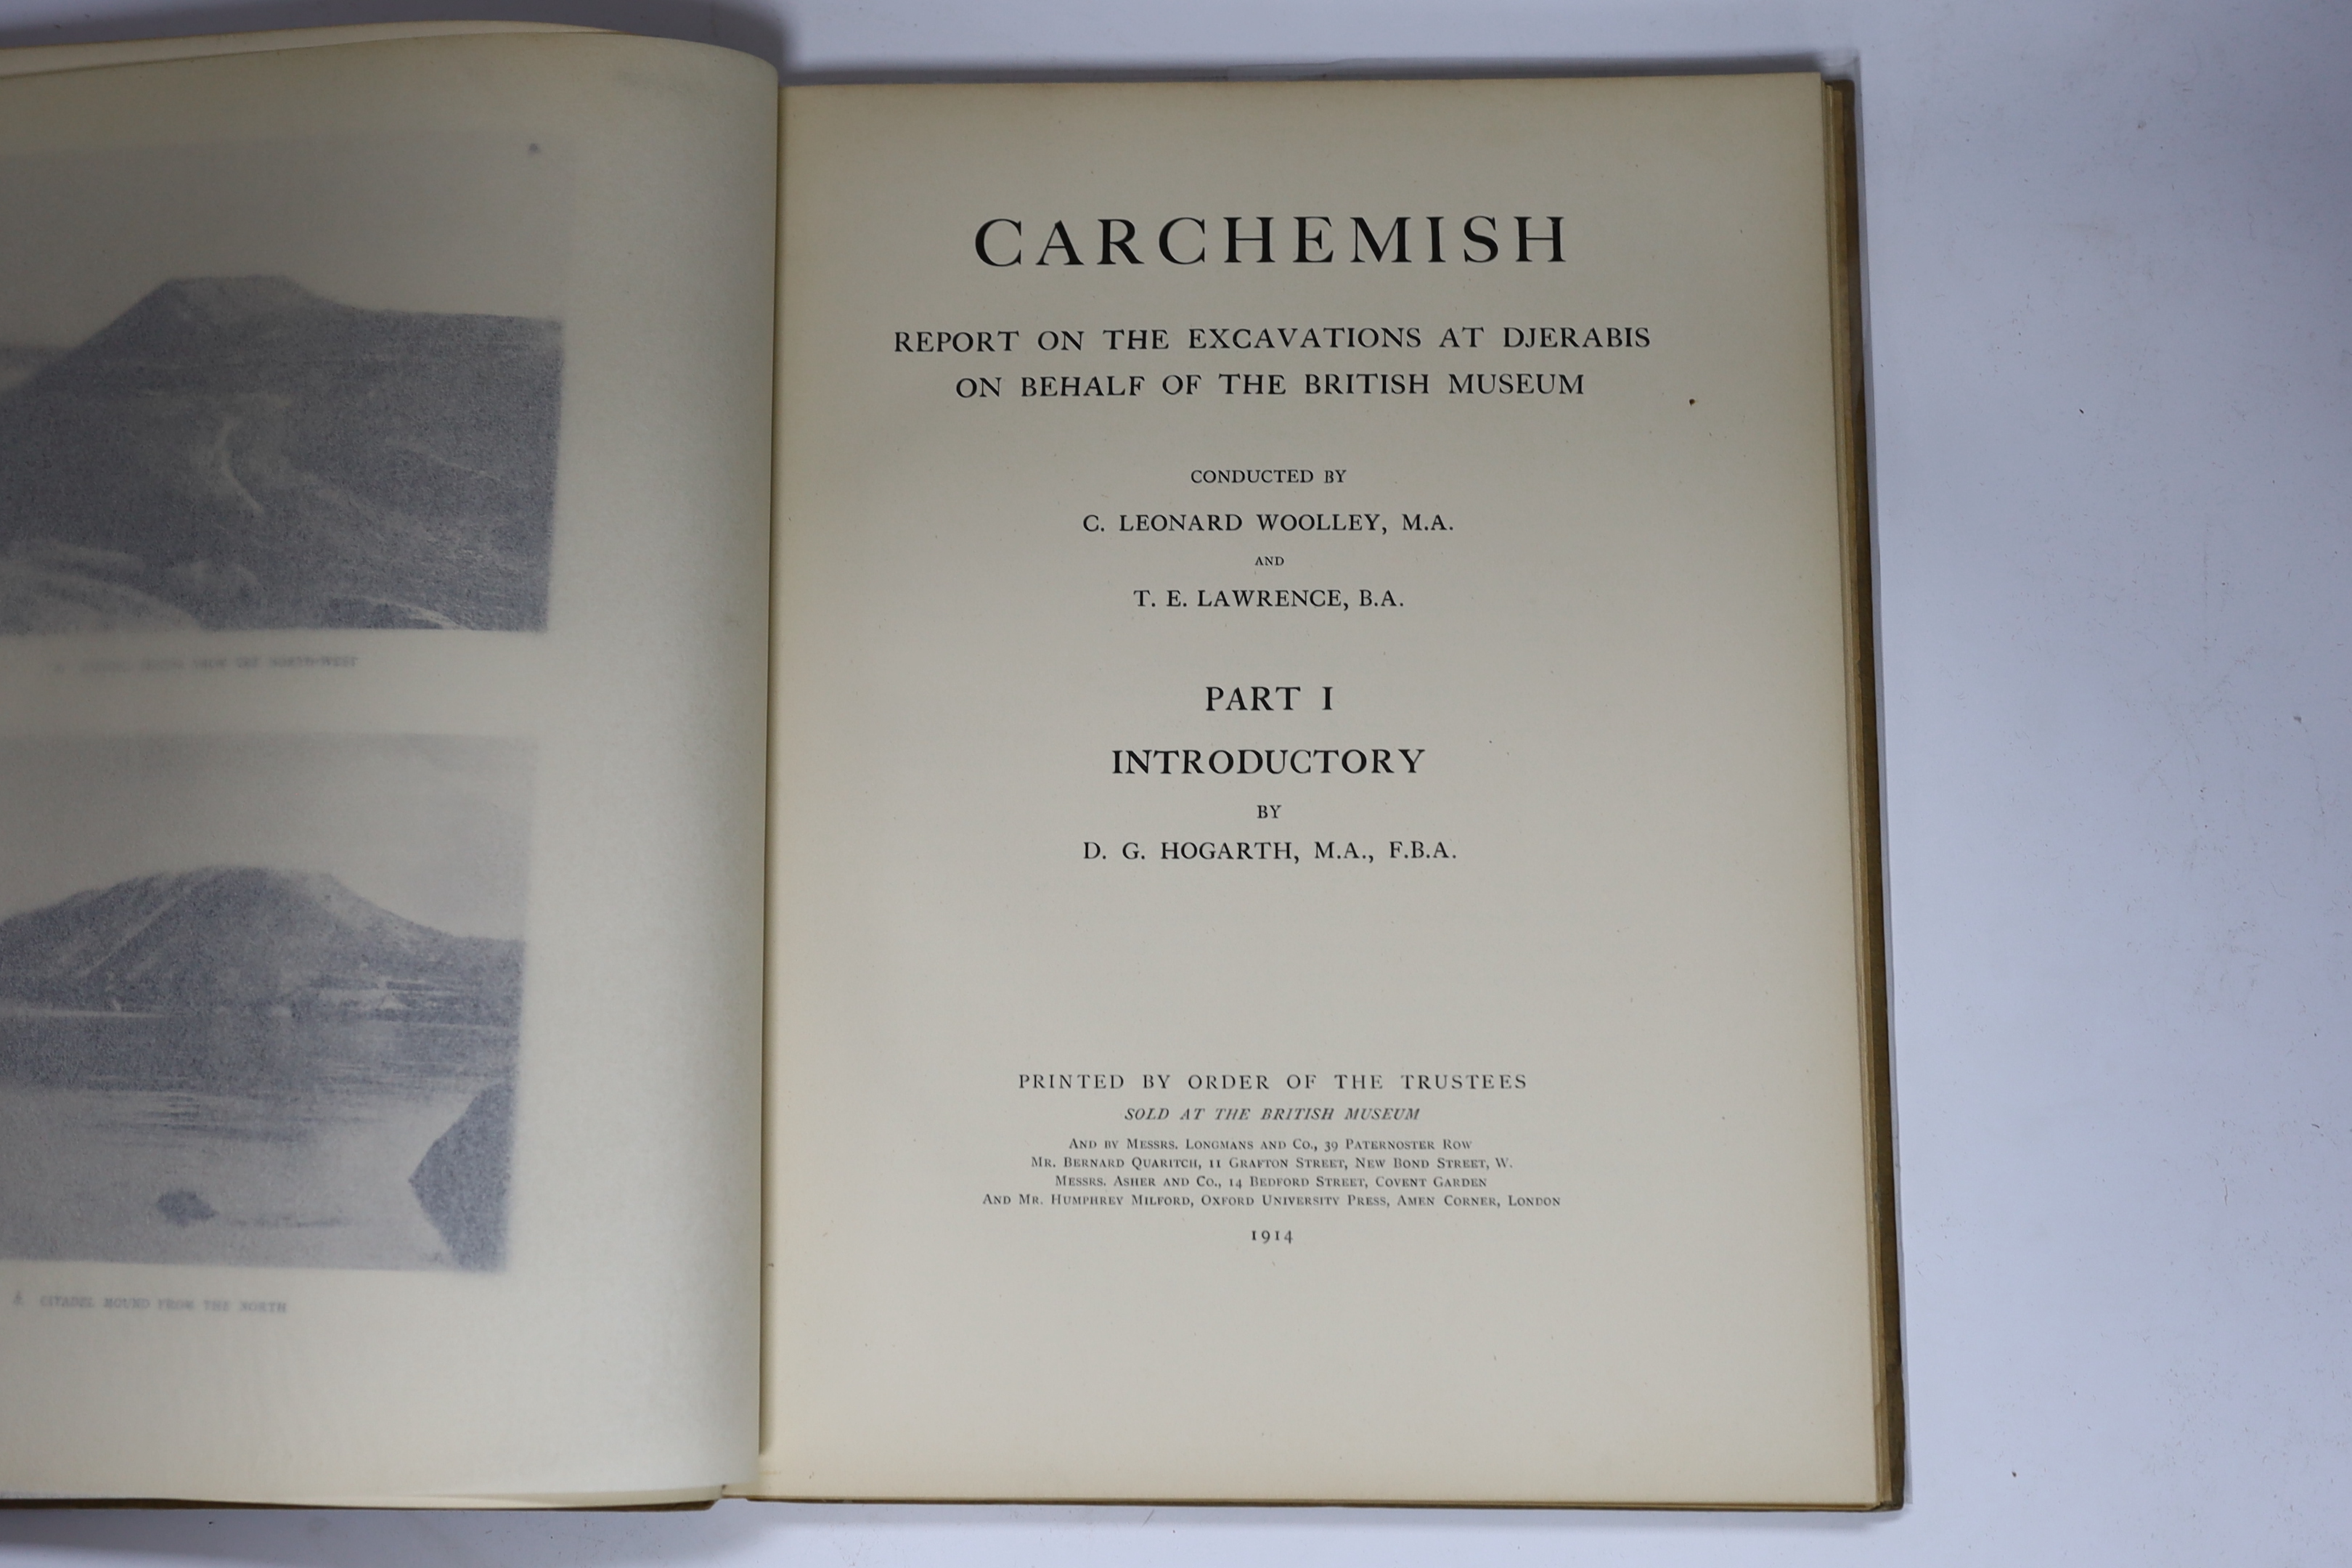 Lawrence, T.E, Woolley, C.L and Hogarth, D.G (intro) - Carchemish. Report on the Excavations at Djerabis on behalf of the British Museum, conducted by C. Leonard Woolley MA and TE Lawrence, Part I, British Museum 1914, F